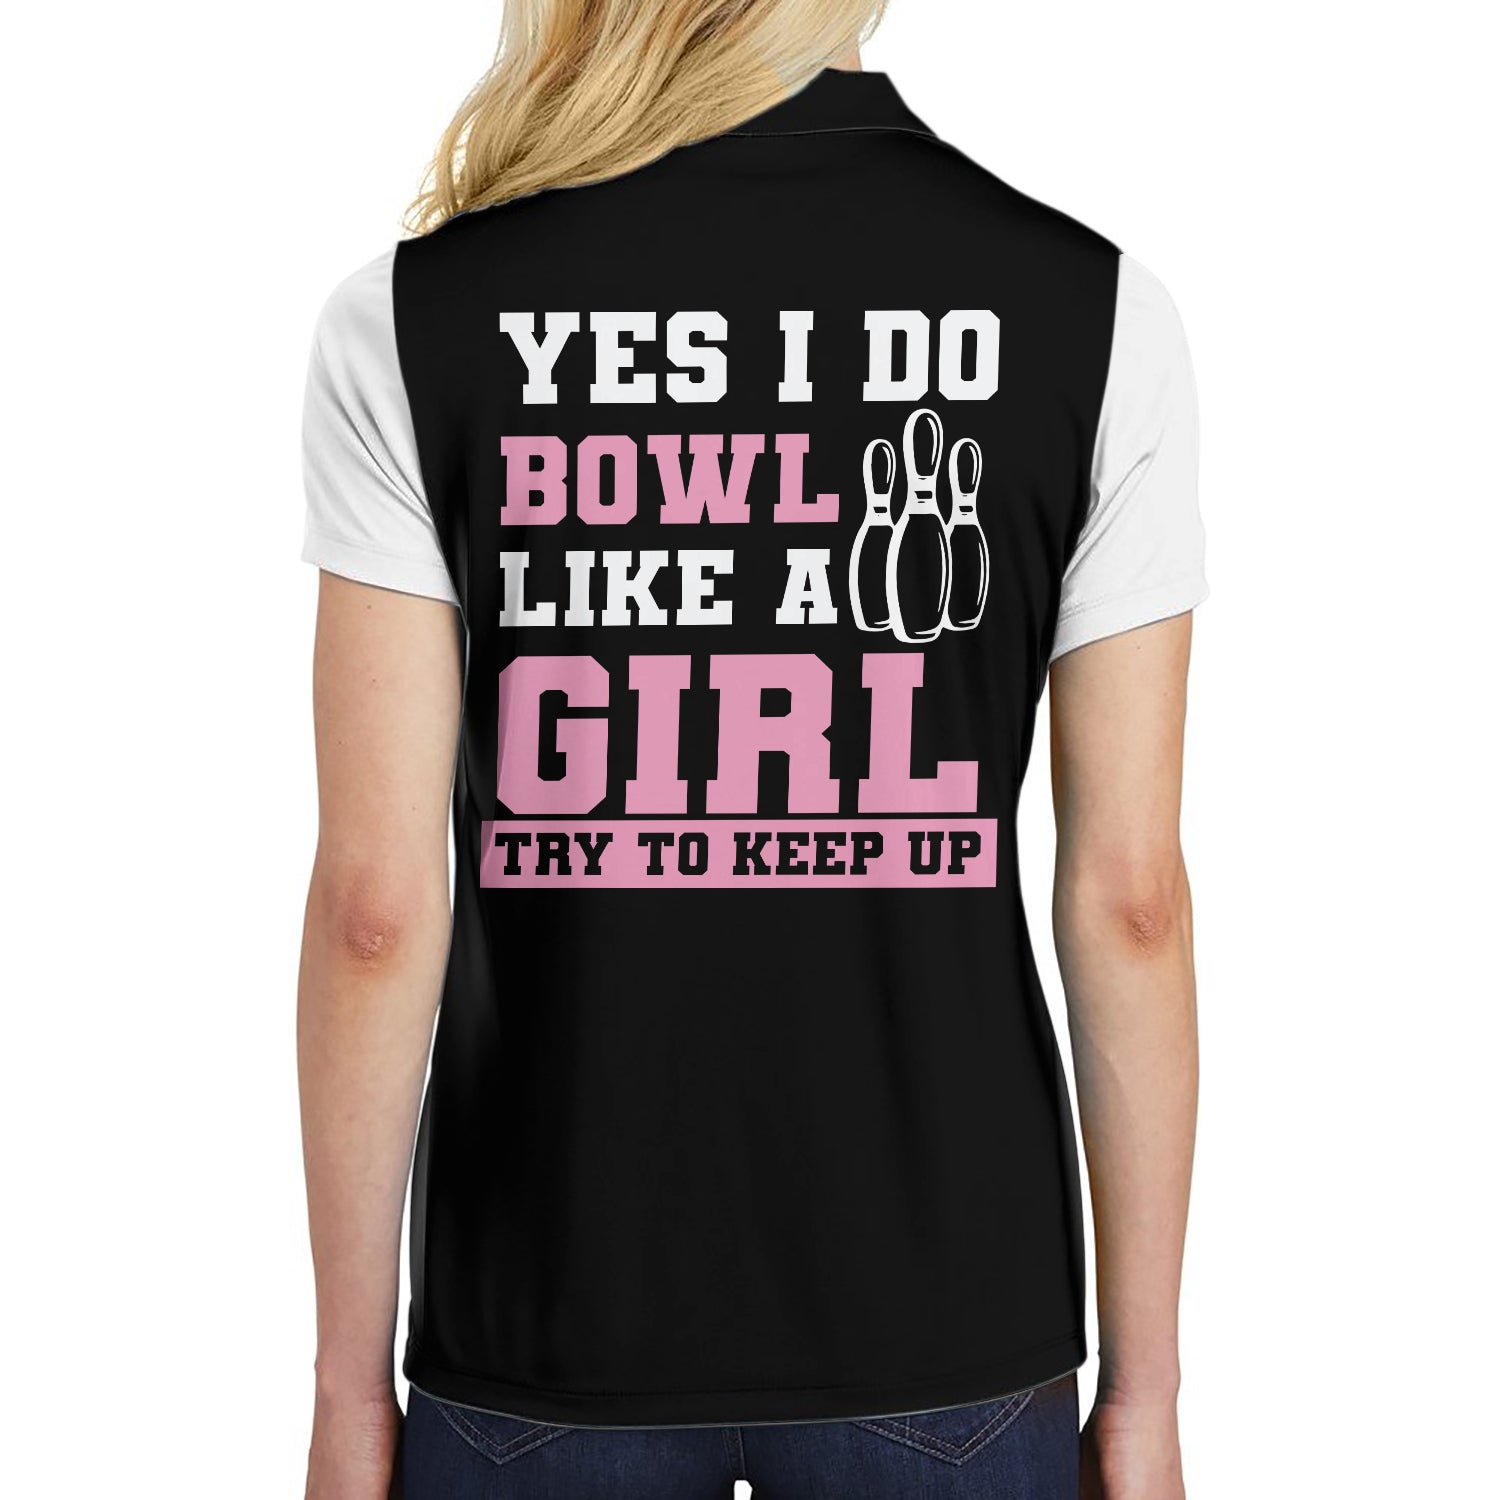 Yes I Do Bowl Like A Girl Try To Keep Up Bowling Short Sleeve Women Polo Shirt/ Bowling Shirt For Ladies Coolspod